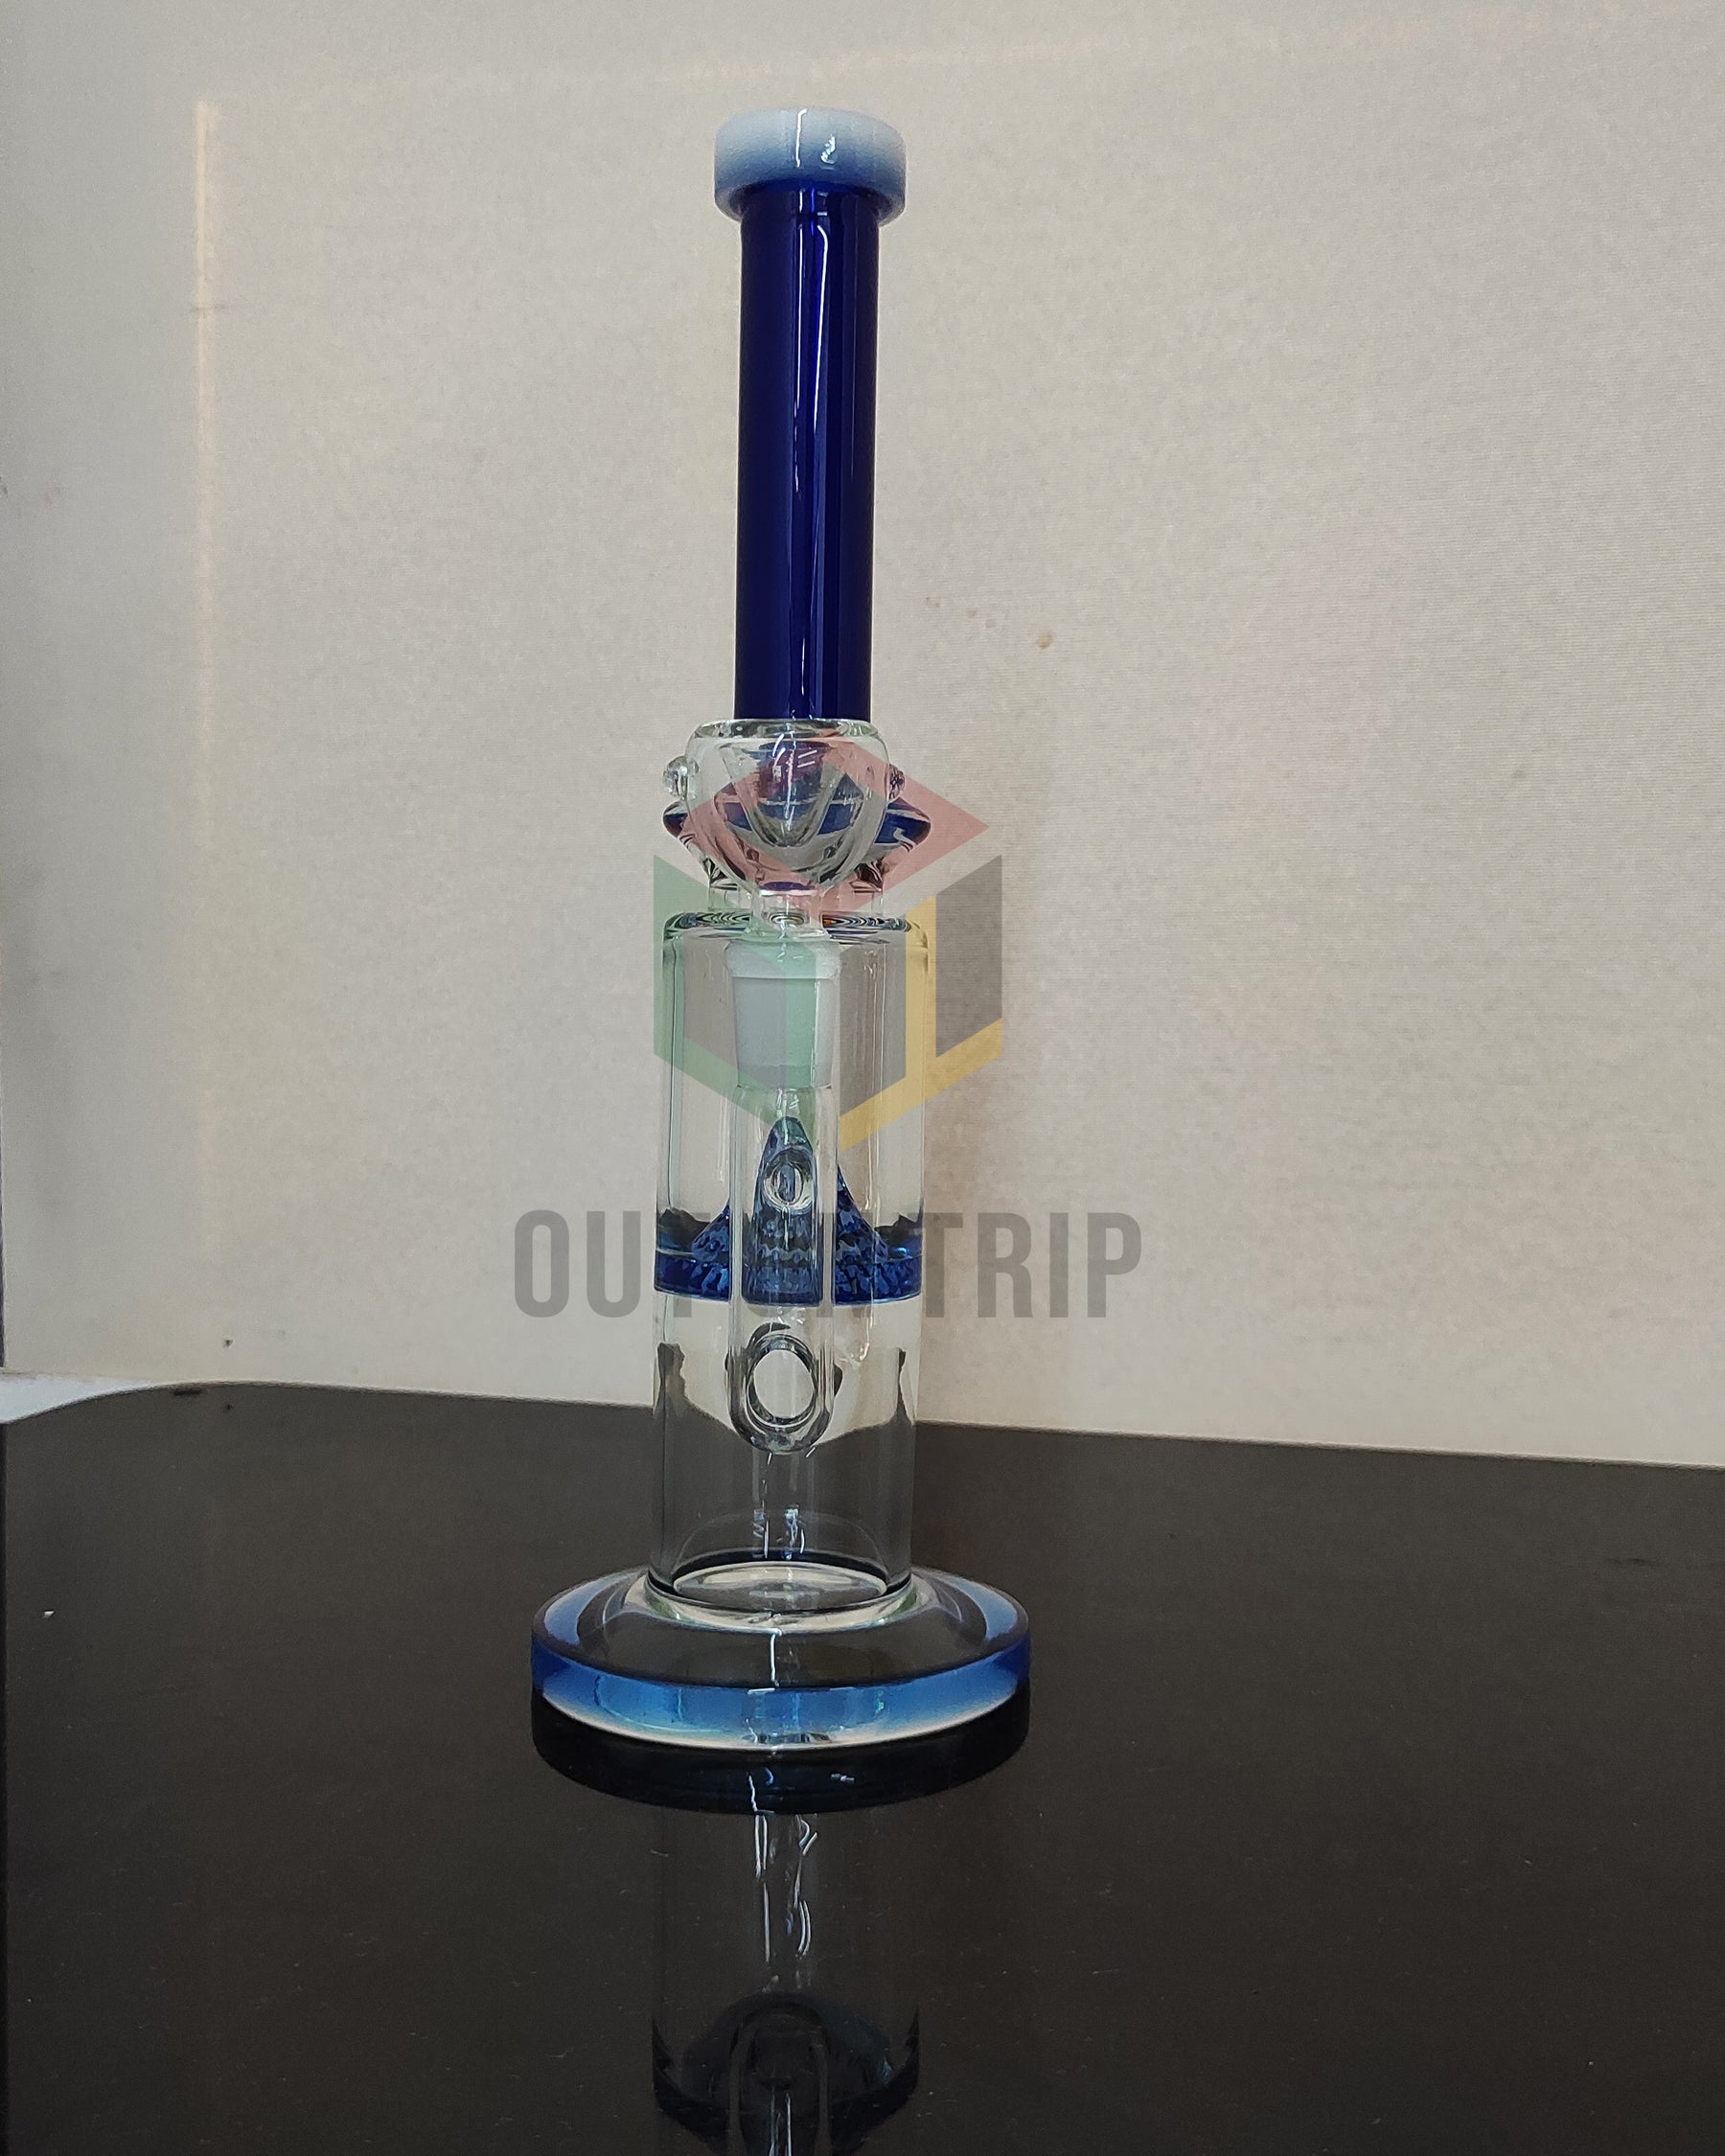 12 Inch Can Assorted Colors Bong with Mountain Percolator (Discontinued)